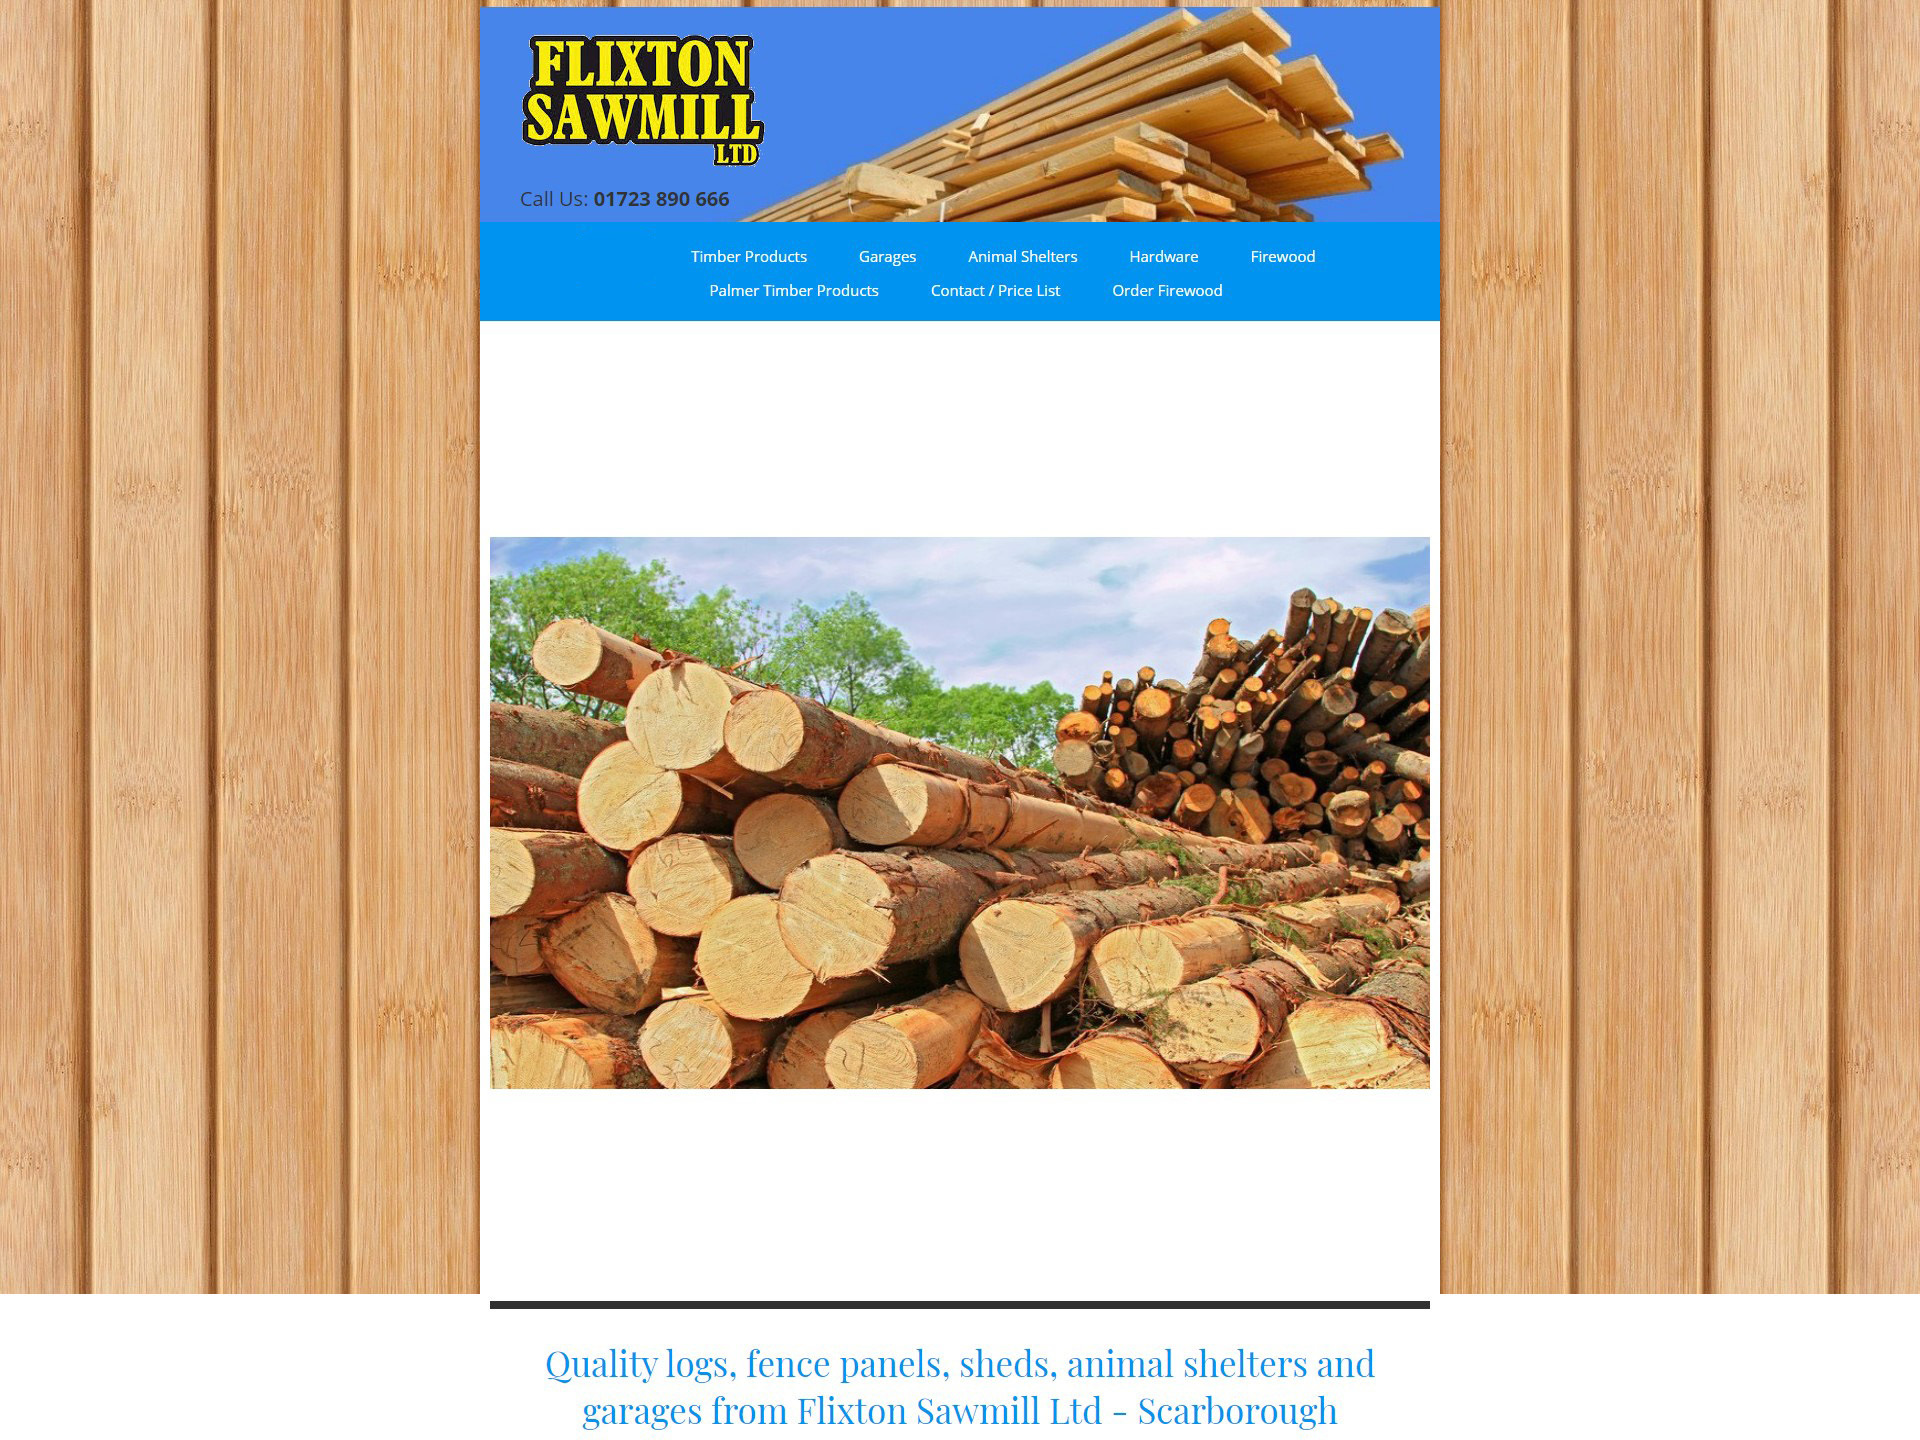 The before website design for Flixton Sawmill